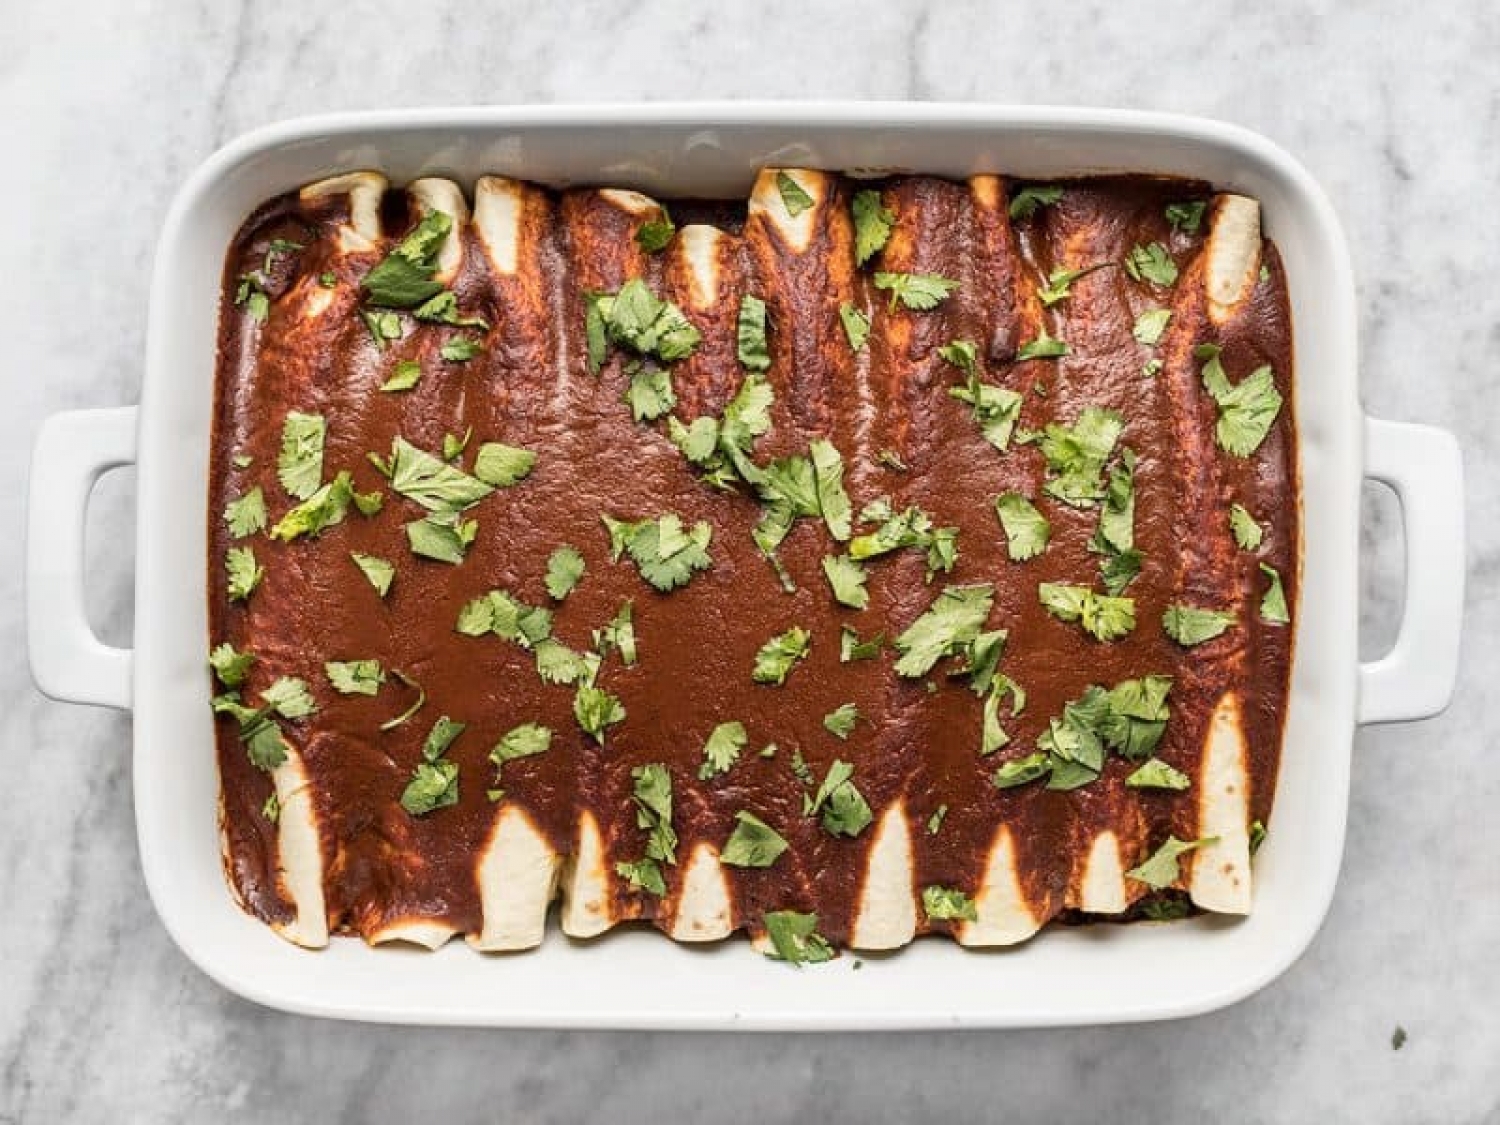 <p>These black bean and avocado enchiladas are made with the most irresistible homemade sauce and will keep you full for hours. The filling also includes corn for extra crunch and fresh cilantro to add that unmistakable Mexican flavor profile. <a href="https://www.budgetbytes.com/black-bean-avocado-enchiladas/" rel="noopener">Get the recipe here.</a></p>